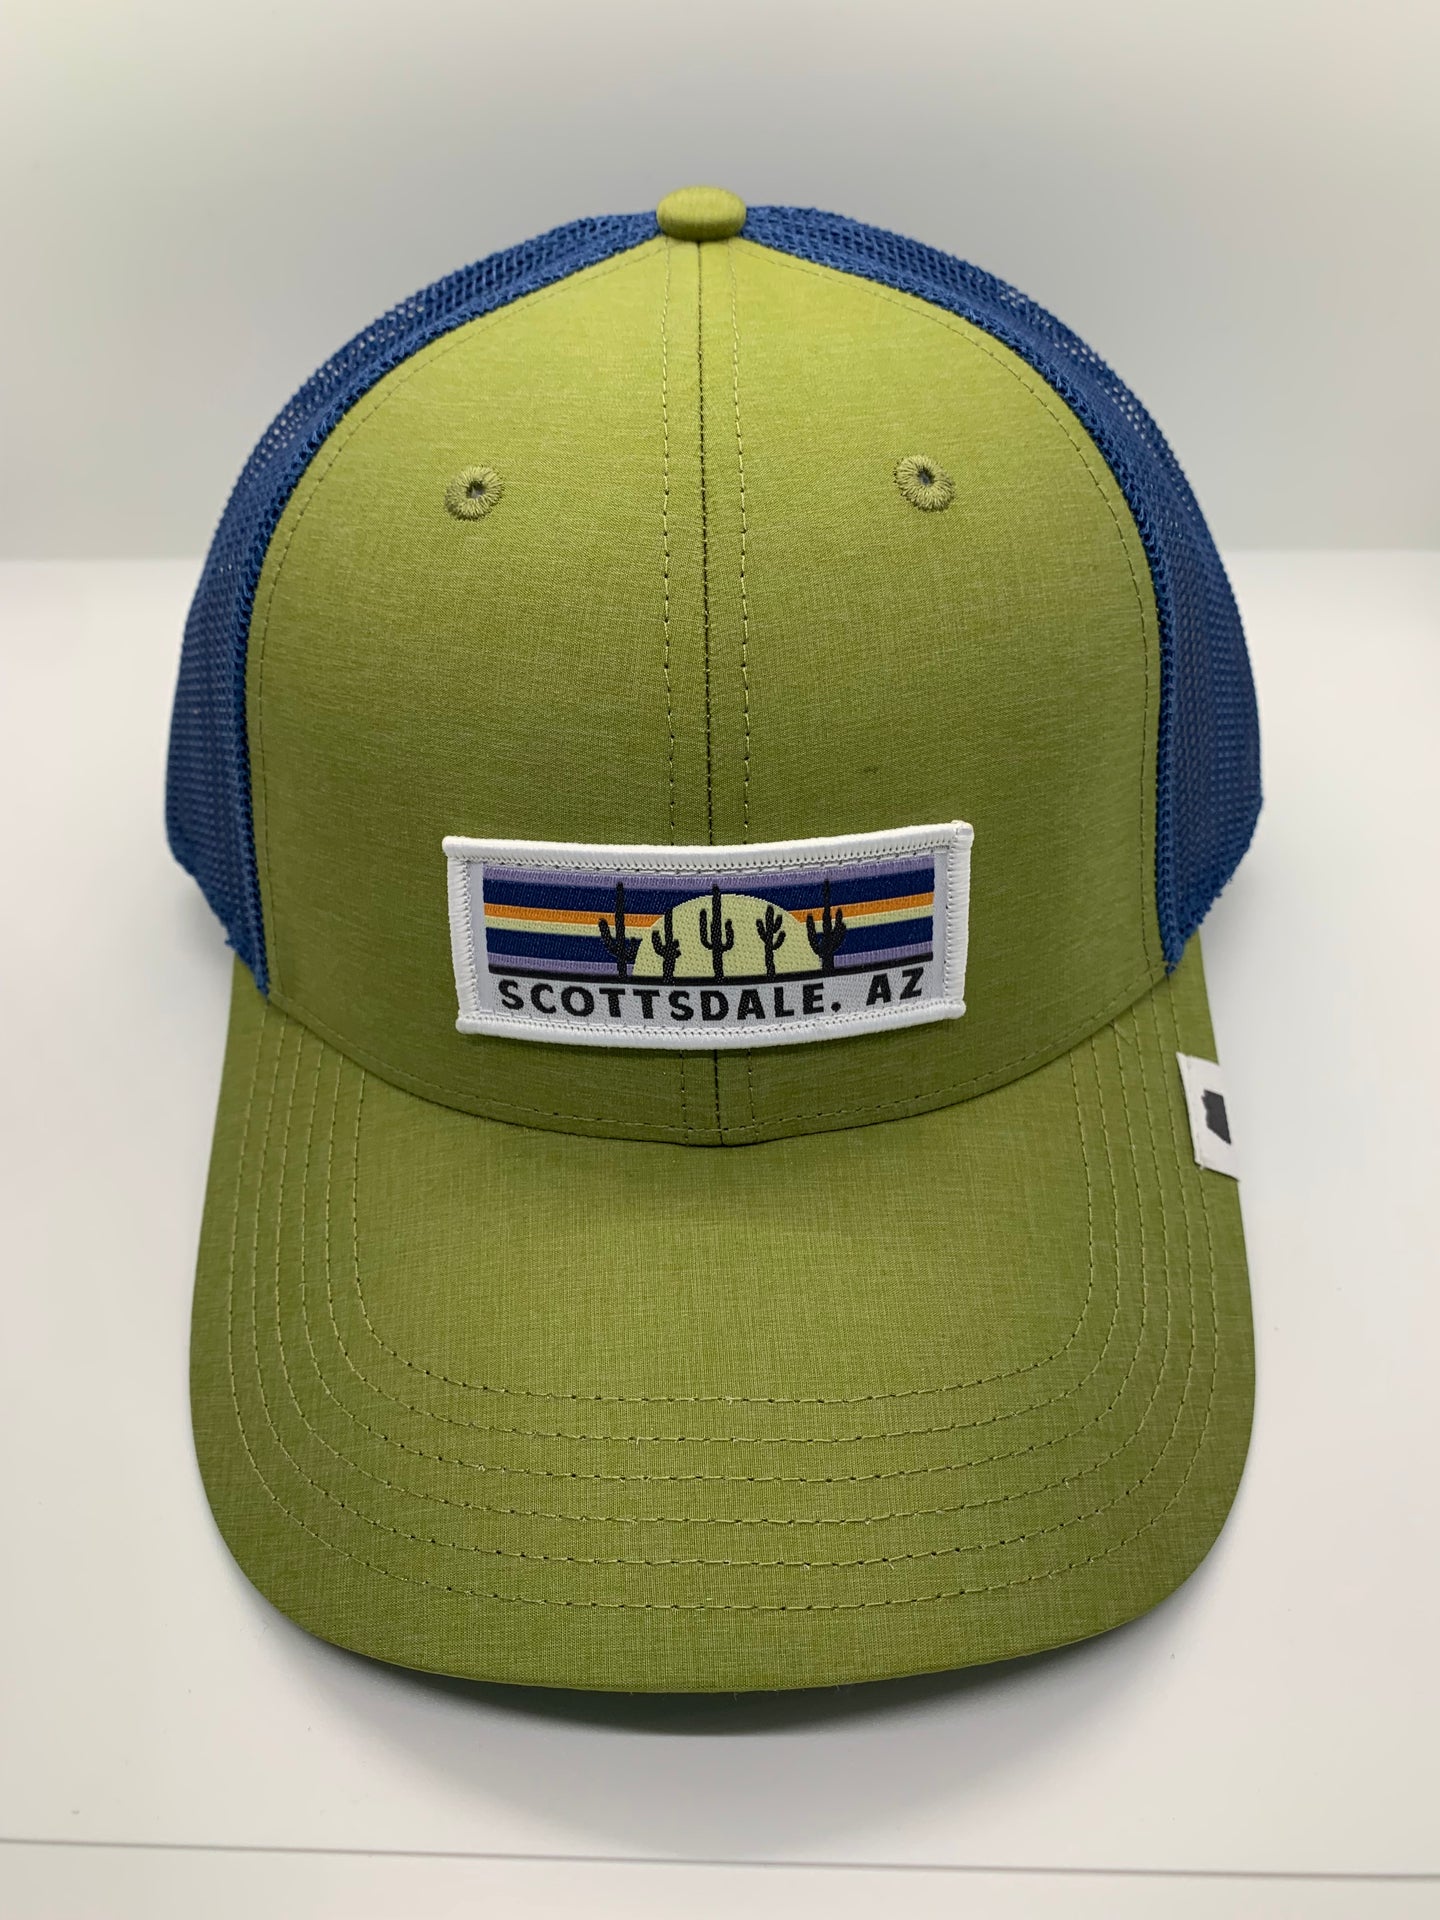 G54 Lime Green and Blue Scottsdale, Az Trucker Hat with custom Kactus Jock taping and  snapback